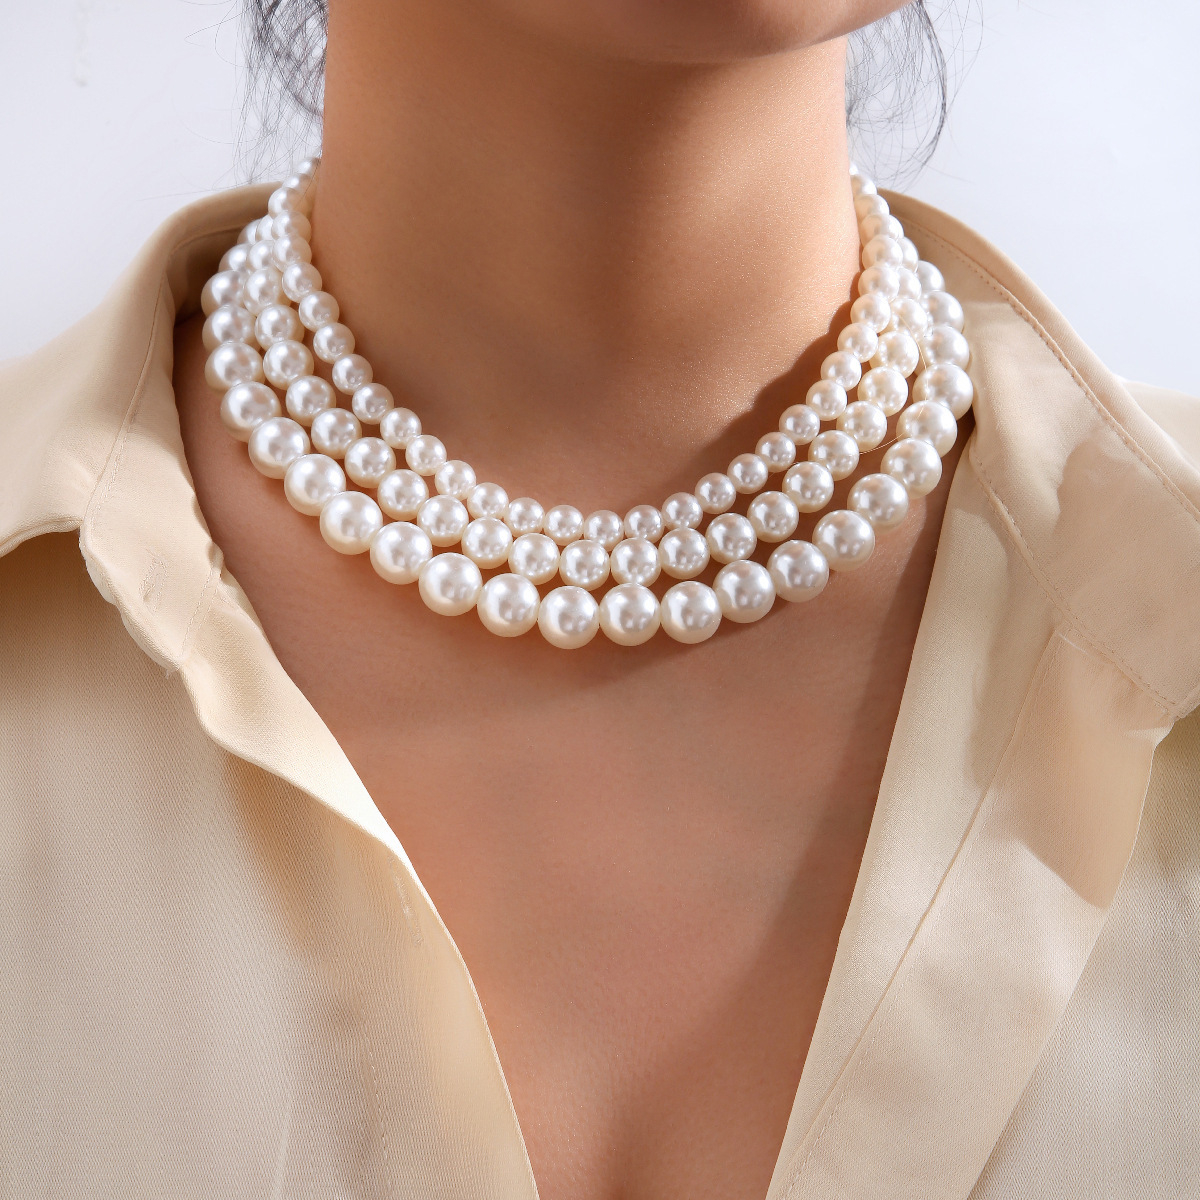 56516 Creative Simple Female Three Layer Clavicle Chain Vintage Necklace Baroque Jewelry Pearl Necklace